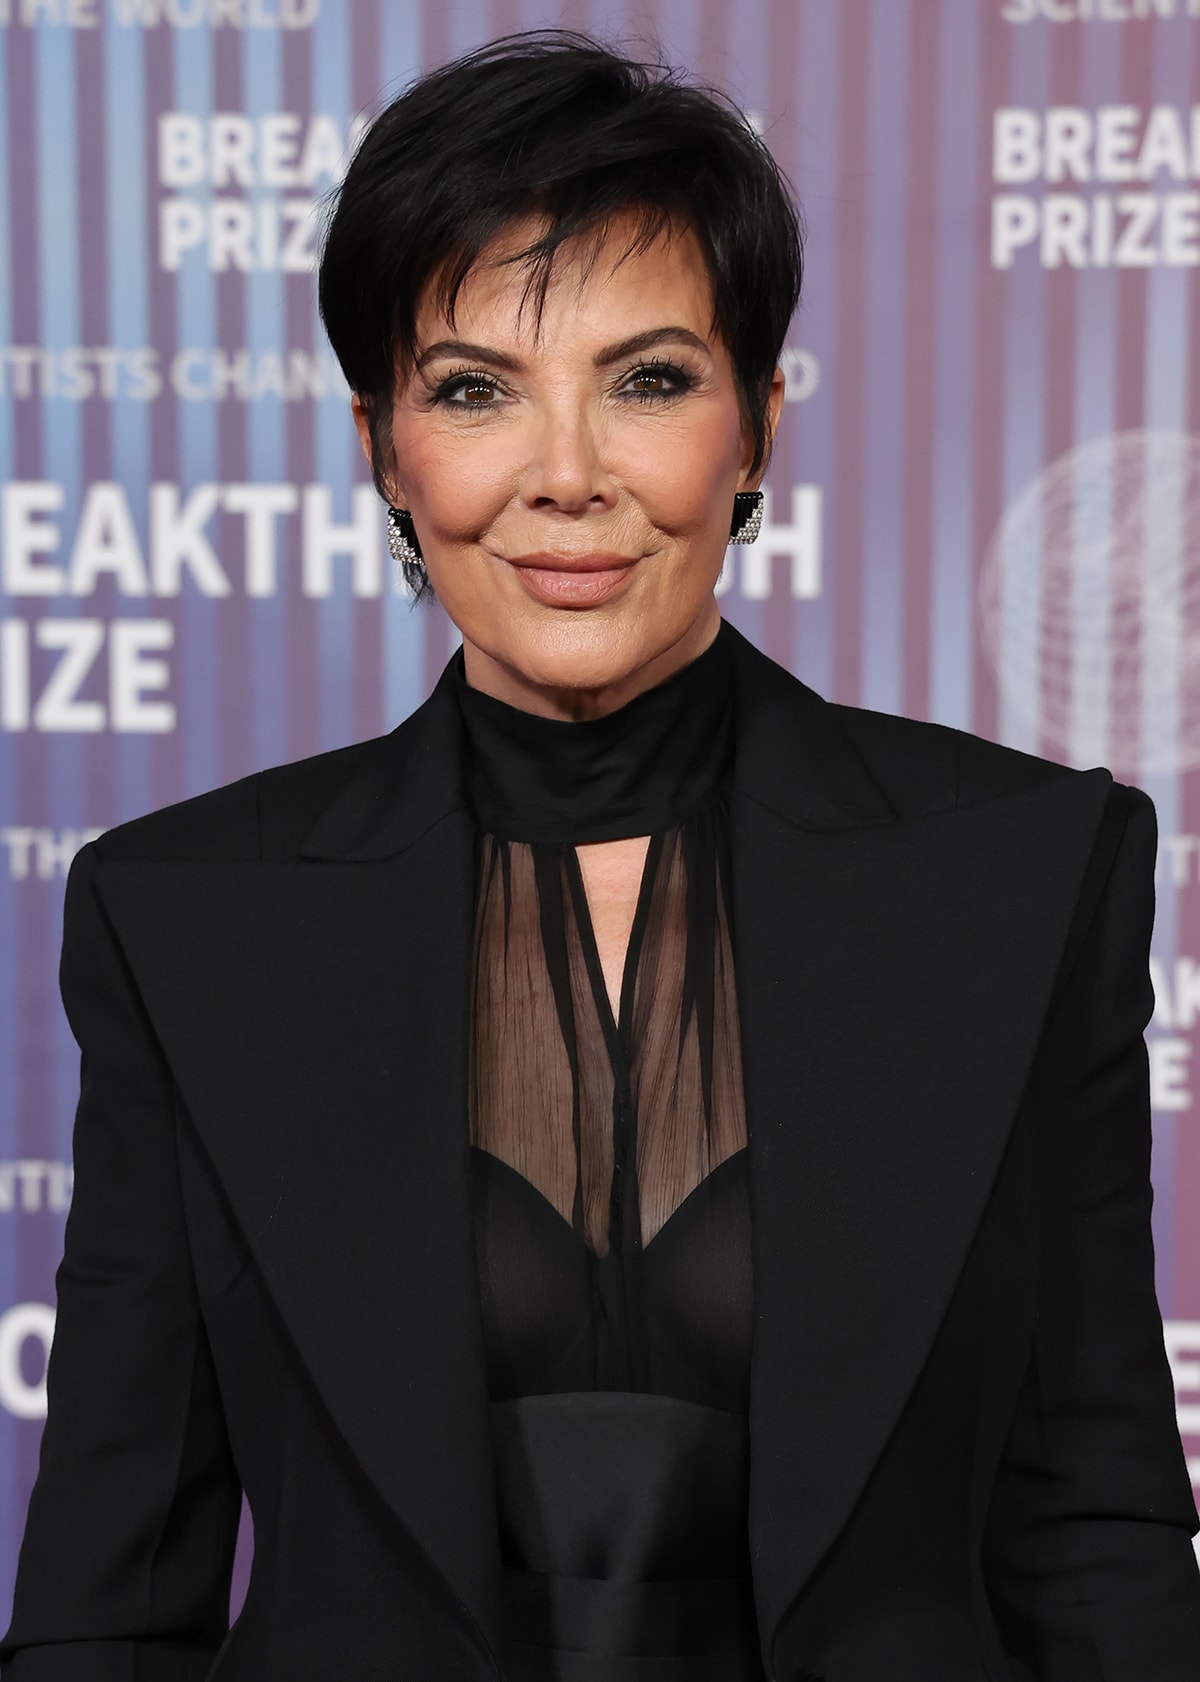 Kris Jenner wears her signature glam, including her pixie cut, smokey eyes, and nude lipstick